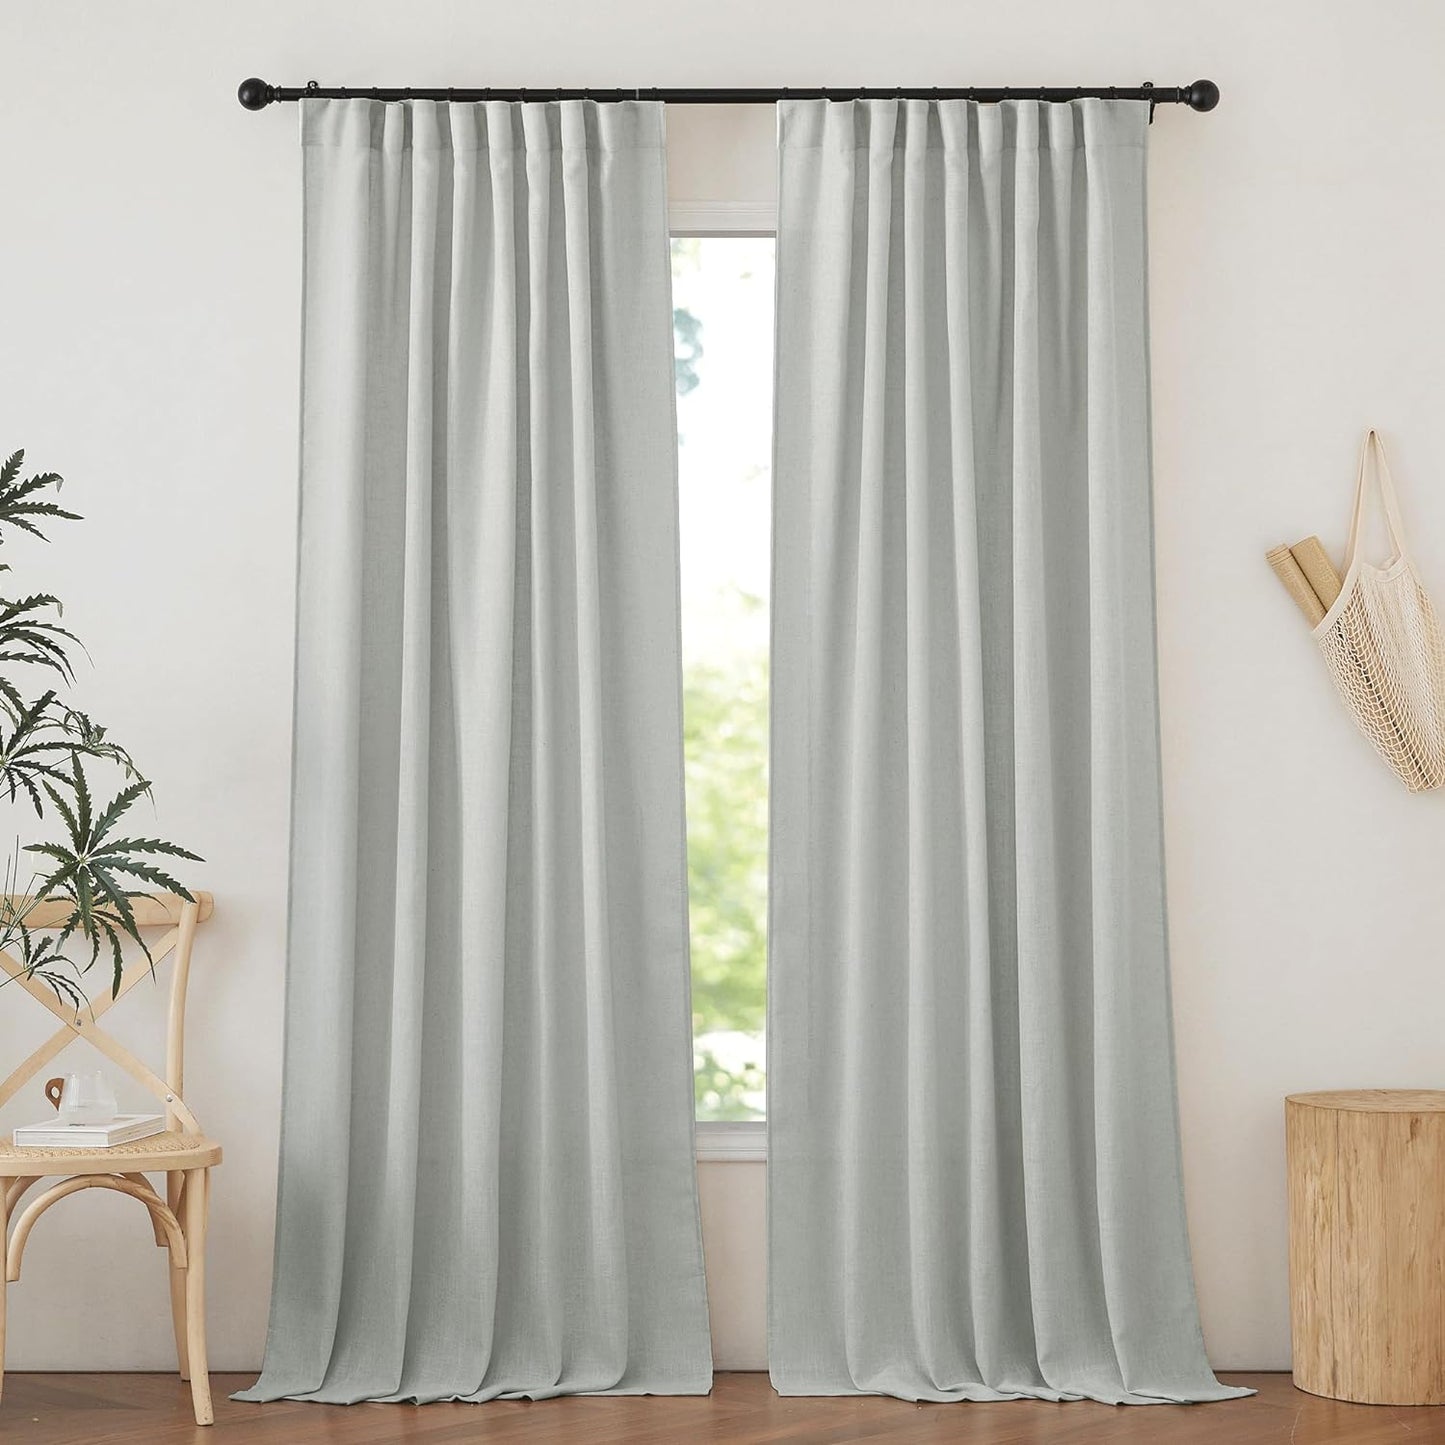 NICETOWN White Curtains Sheer - Semi Sheer Window Covering, Light & Airy Privacy Rod Pocket Back Tab Pinche Pleated Drapes for Bedroom Living Room Patio Glass Door, 52 X 63 Inches Long, Set of 2  NICETOWN Dark Grey W52 X L84 